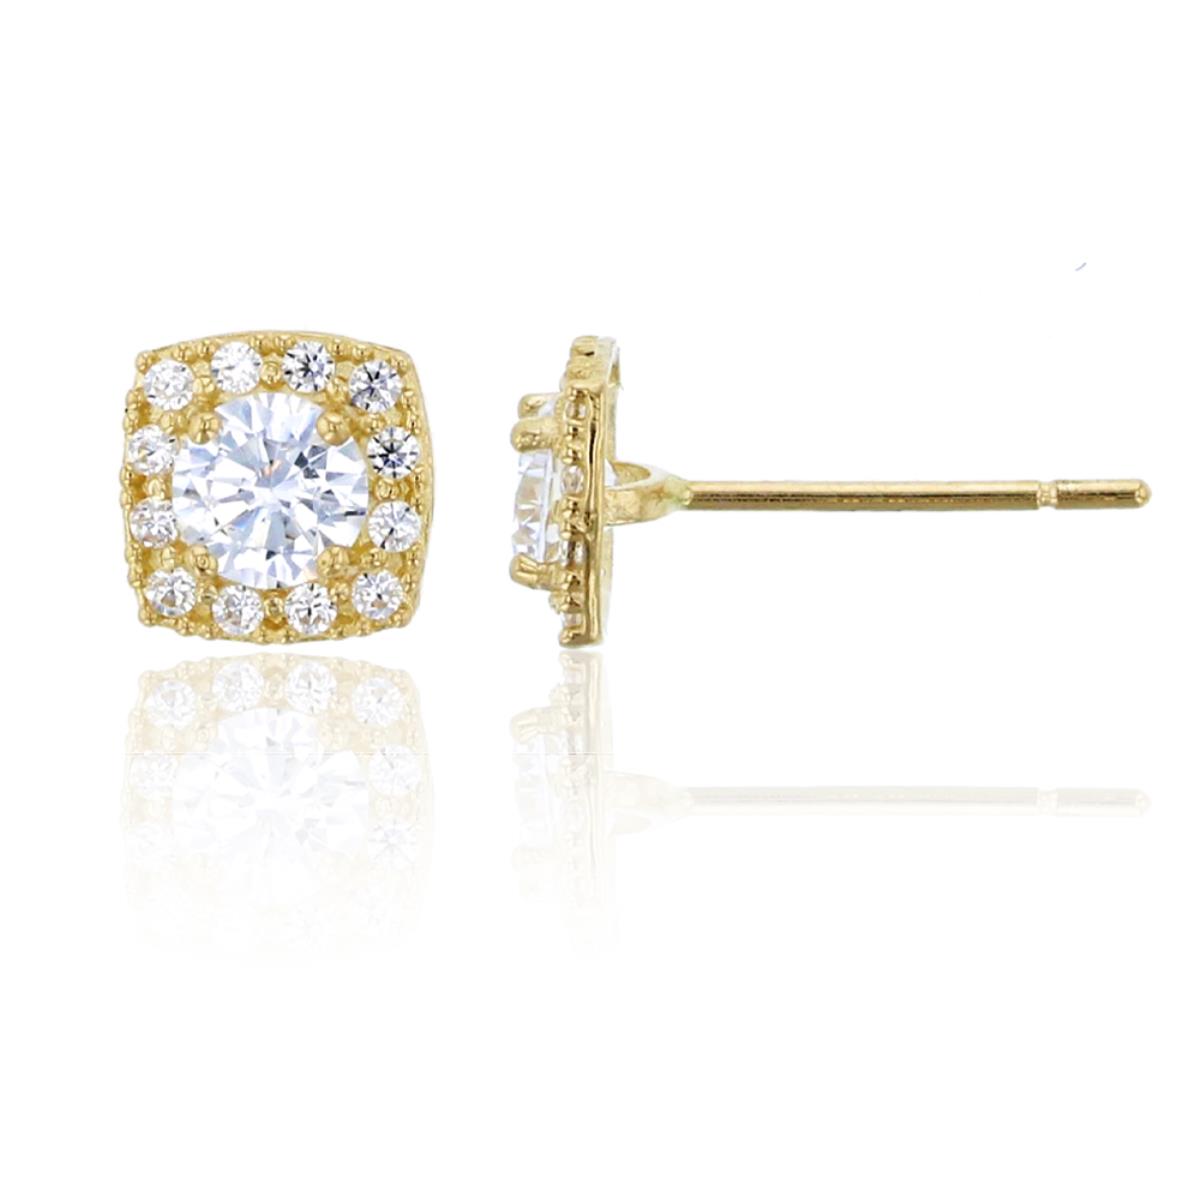 10K Yellow Gold 3.75mm Round Cut Square Shapped Halo Stud Earring